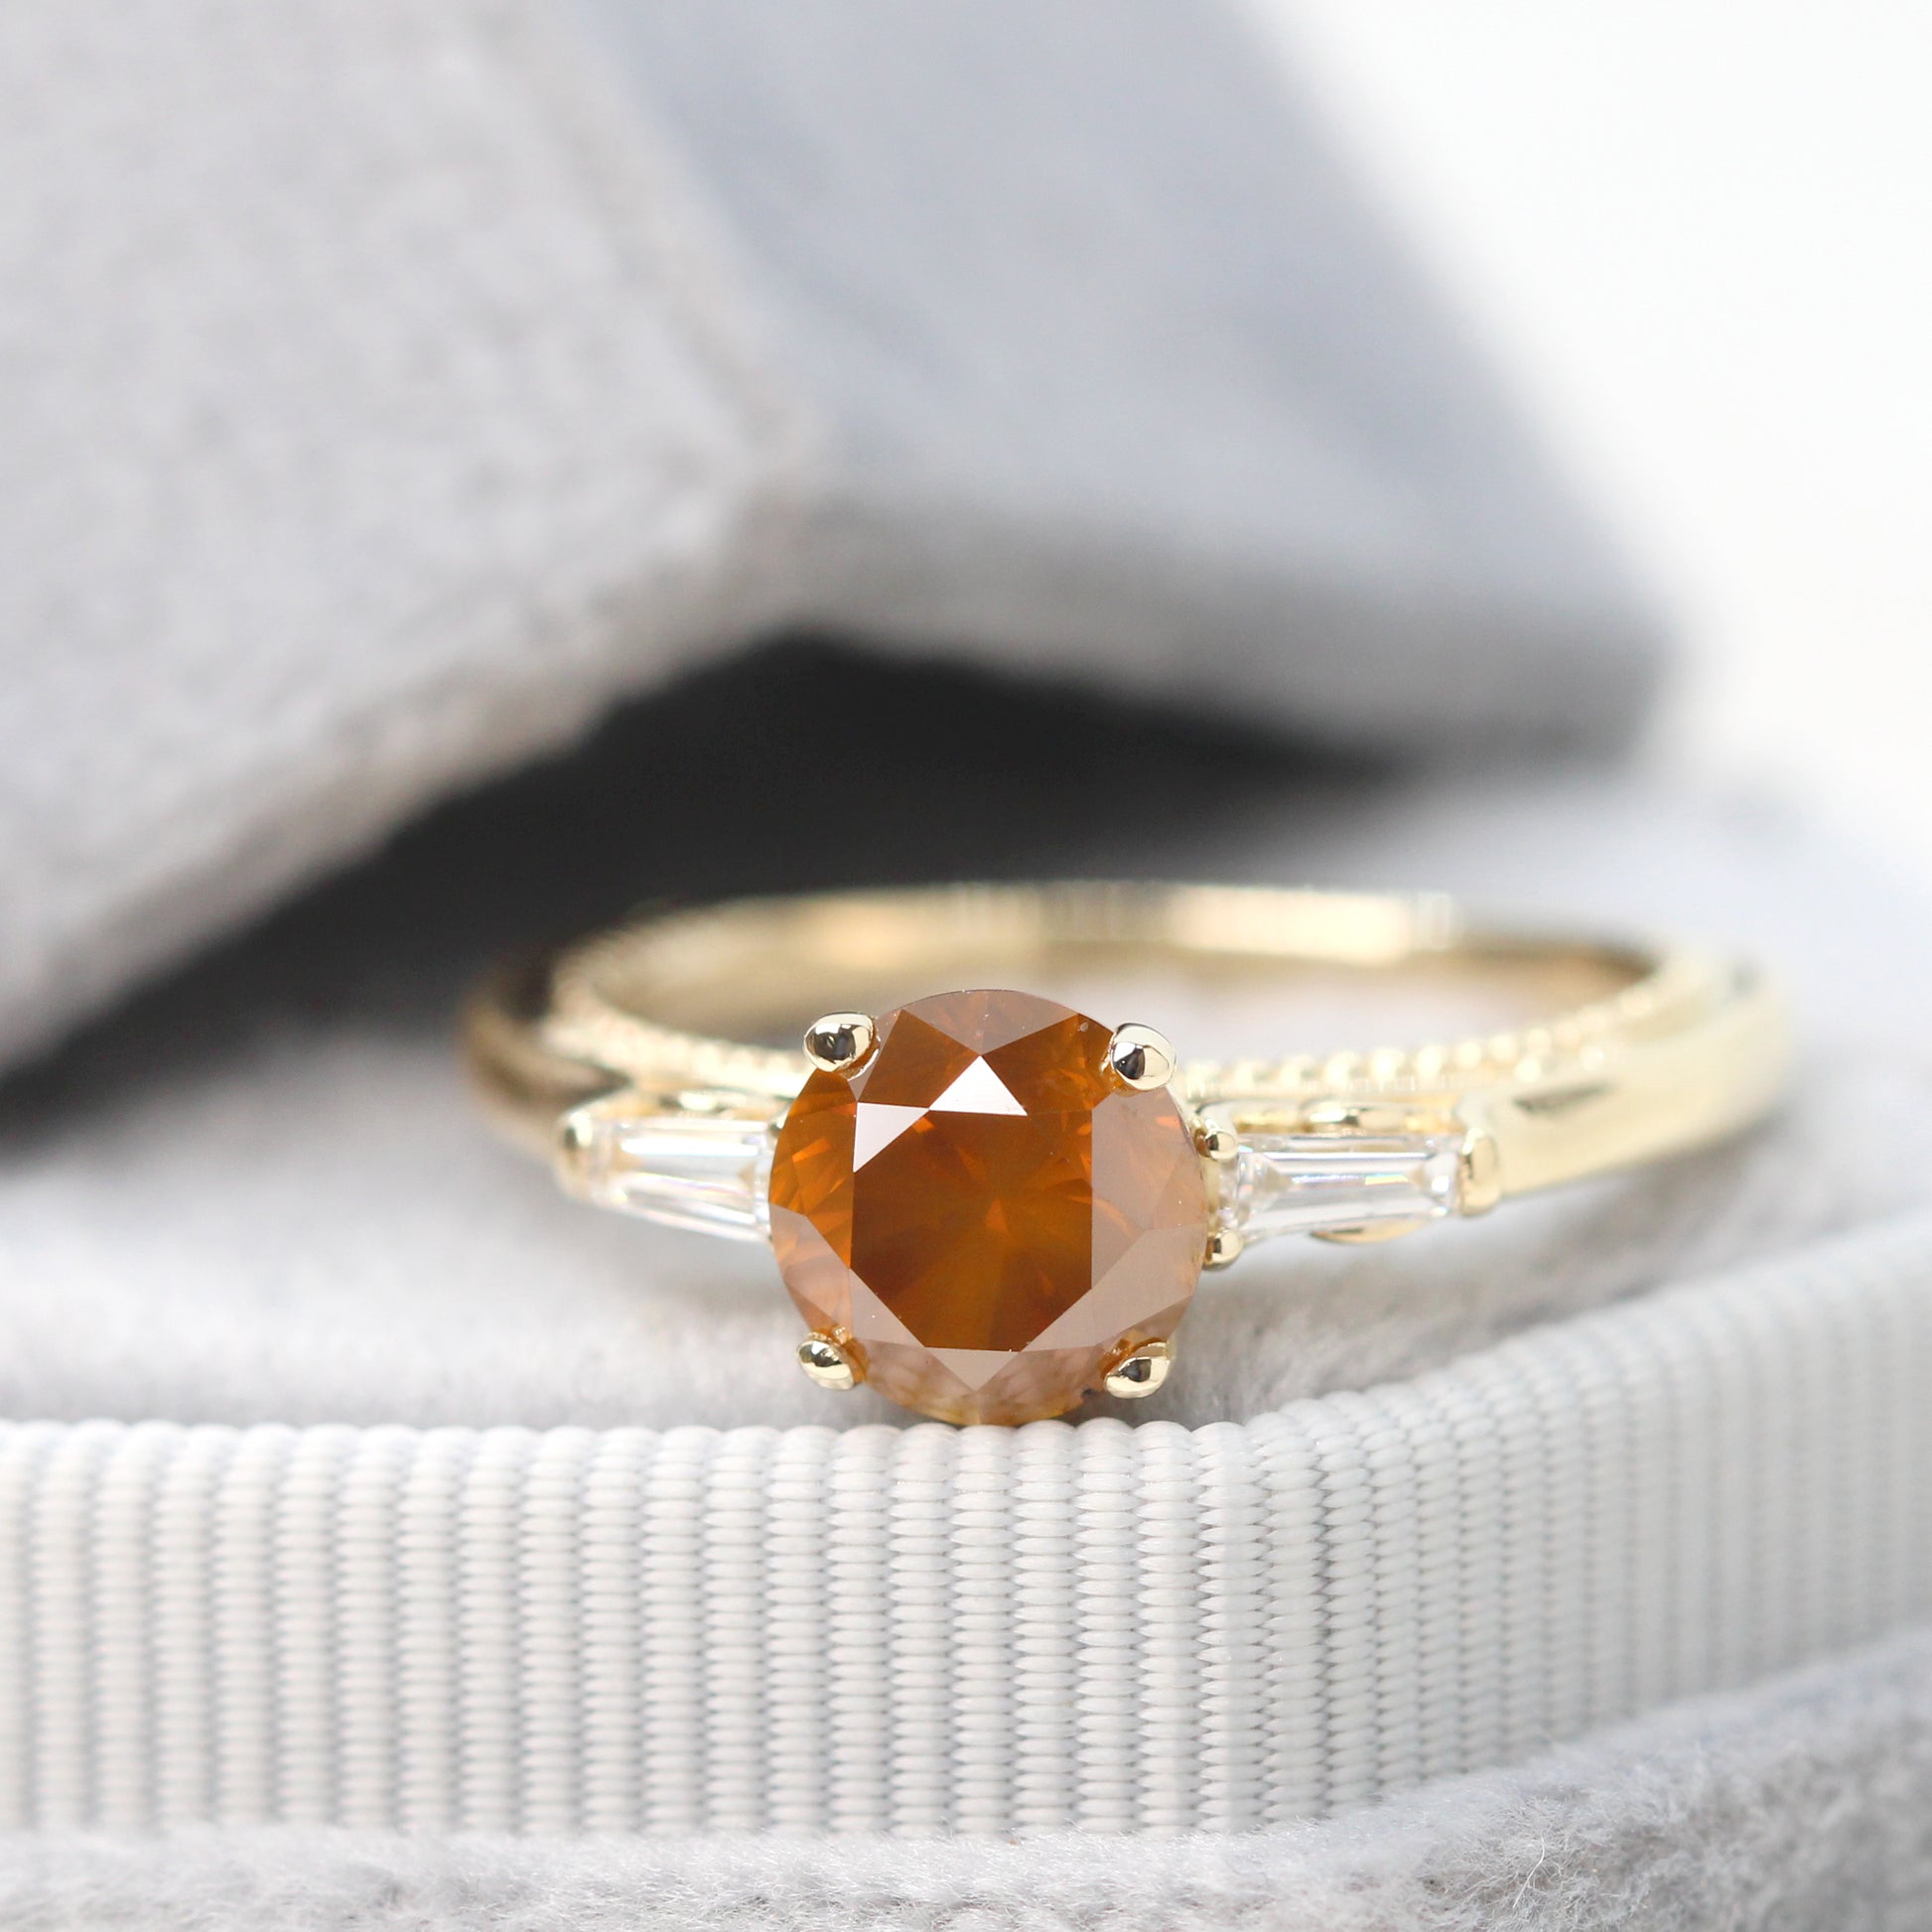 Bella Ring with a 1.29 Carat Round Orange Salt and Pepper Diamond and White Accent Diamonds in 14k Yellow Gold - Ready to Size and Ship - Midwinter Co. Alternative Bridal Rings and Modern Fine Jewelry